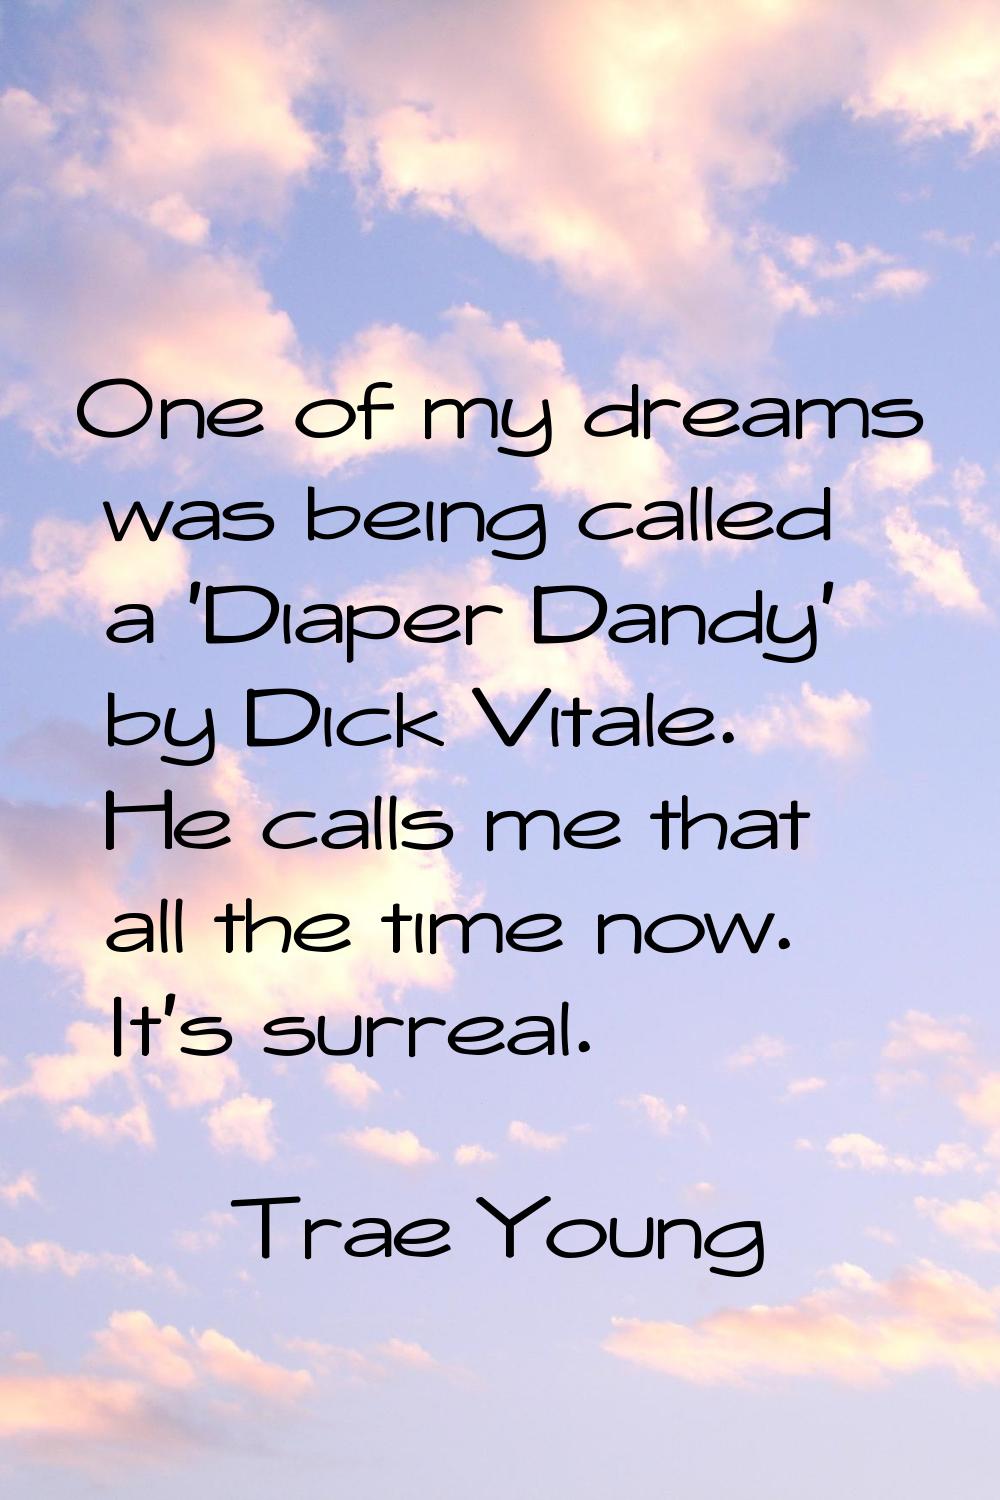 One of my dreams was being called a 'Diaper Dandy' by Dick Vitale. He calls me that all the time no